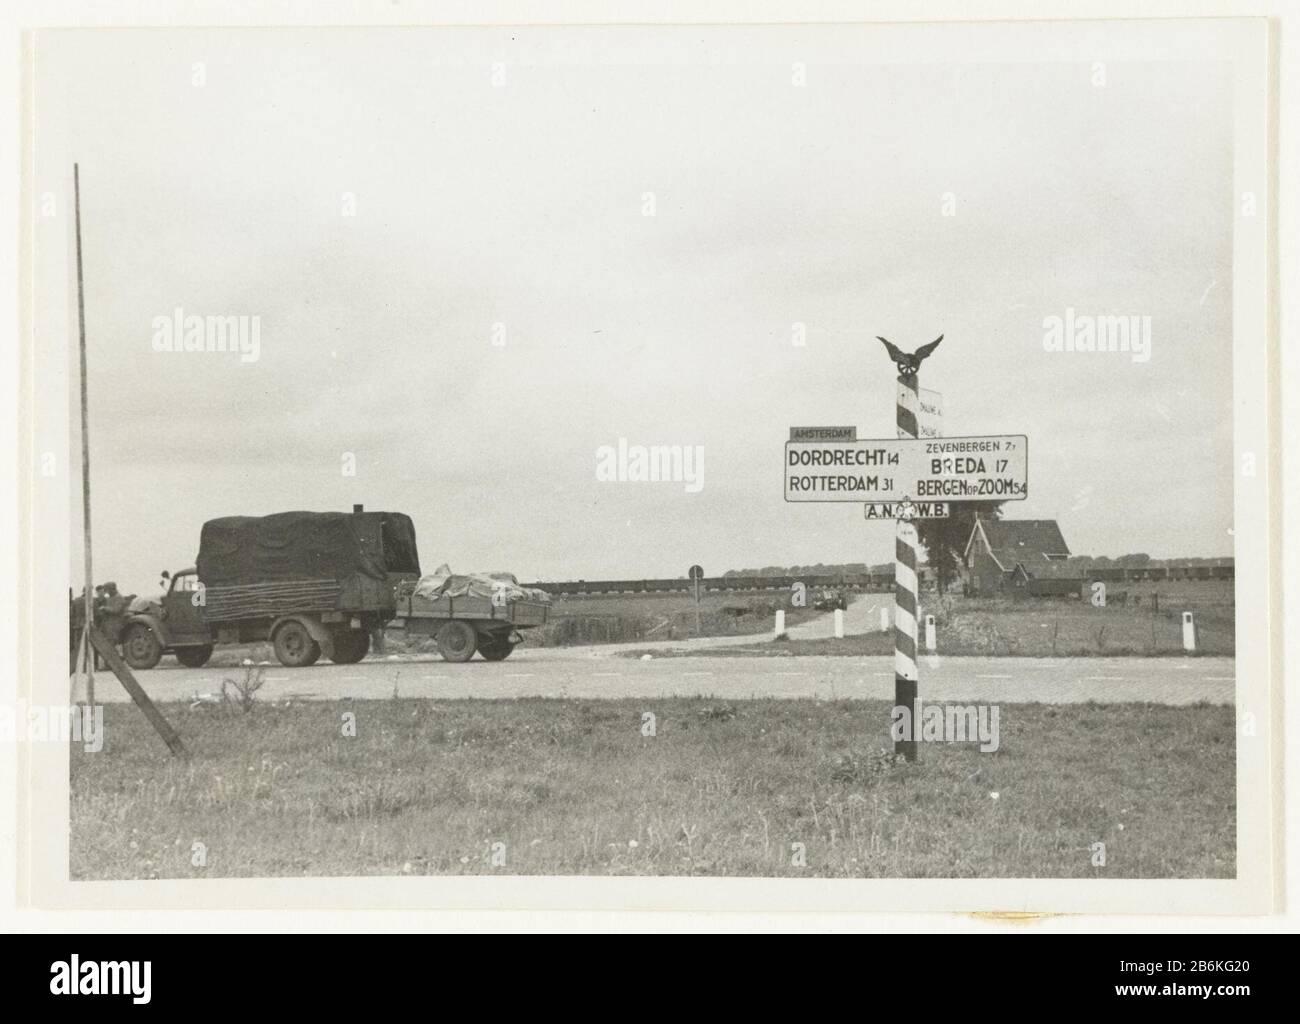 German army truck A truck of the Wehrmacht is on a road with a sign ANWB. Back is: Auf der Strasse nach Auto Rotterdam. Manufacturer : Photographer: anonymous place manufacture: South Holland Date: Jun 1940 - Sep 1940 Physical features: gelatin silver print material: paper Technique: gelatin silver print Dimensions: h 7 cm. B × 10 cm.  Subject: truck, vanmodern forms of military vehiclestroop movements, transportation War II Occupation of Netherlands When: 1940 - 1940 Stock Photo